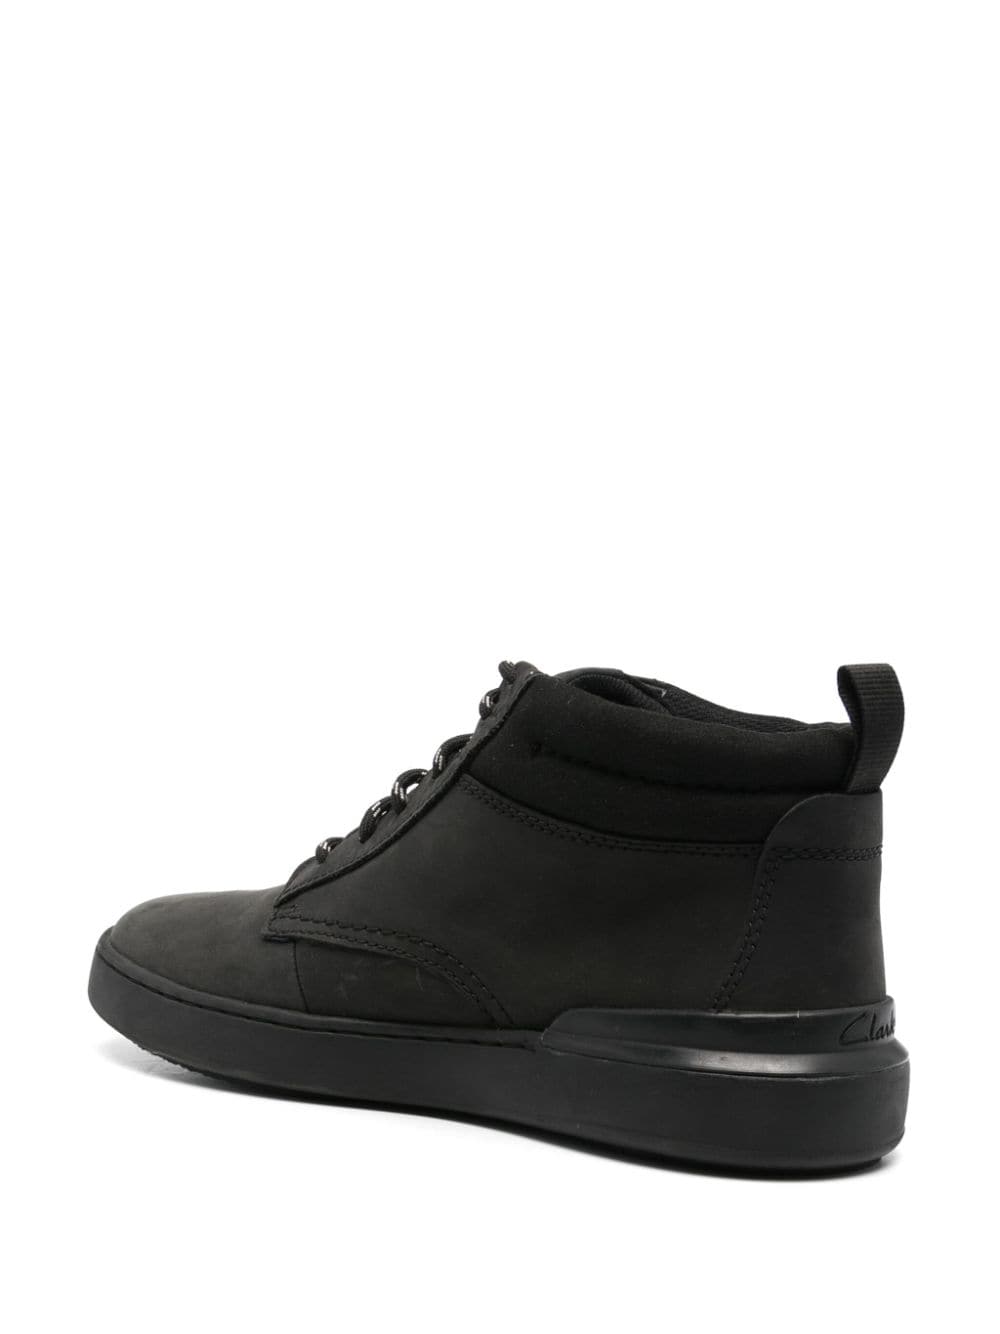 Shop Clarks Courtlite Mid Leather Boots In Black